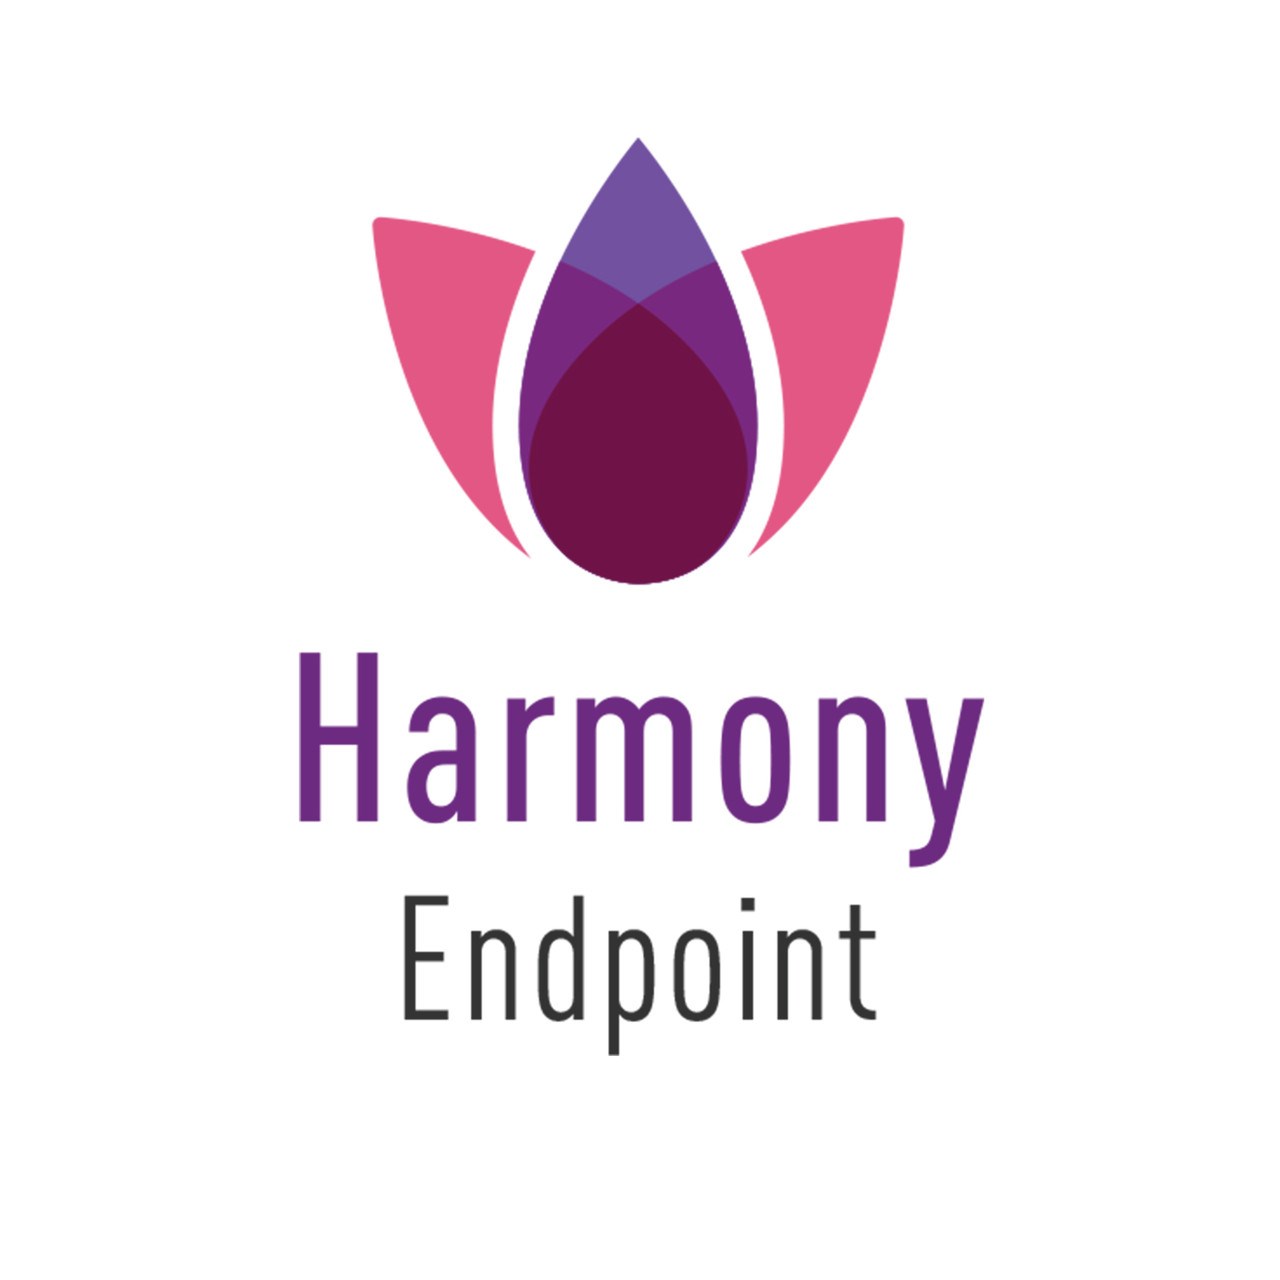 Check Point Harmony Endpoint Basic, Premium direct support, 1 year0 